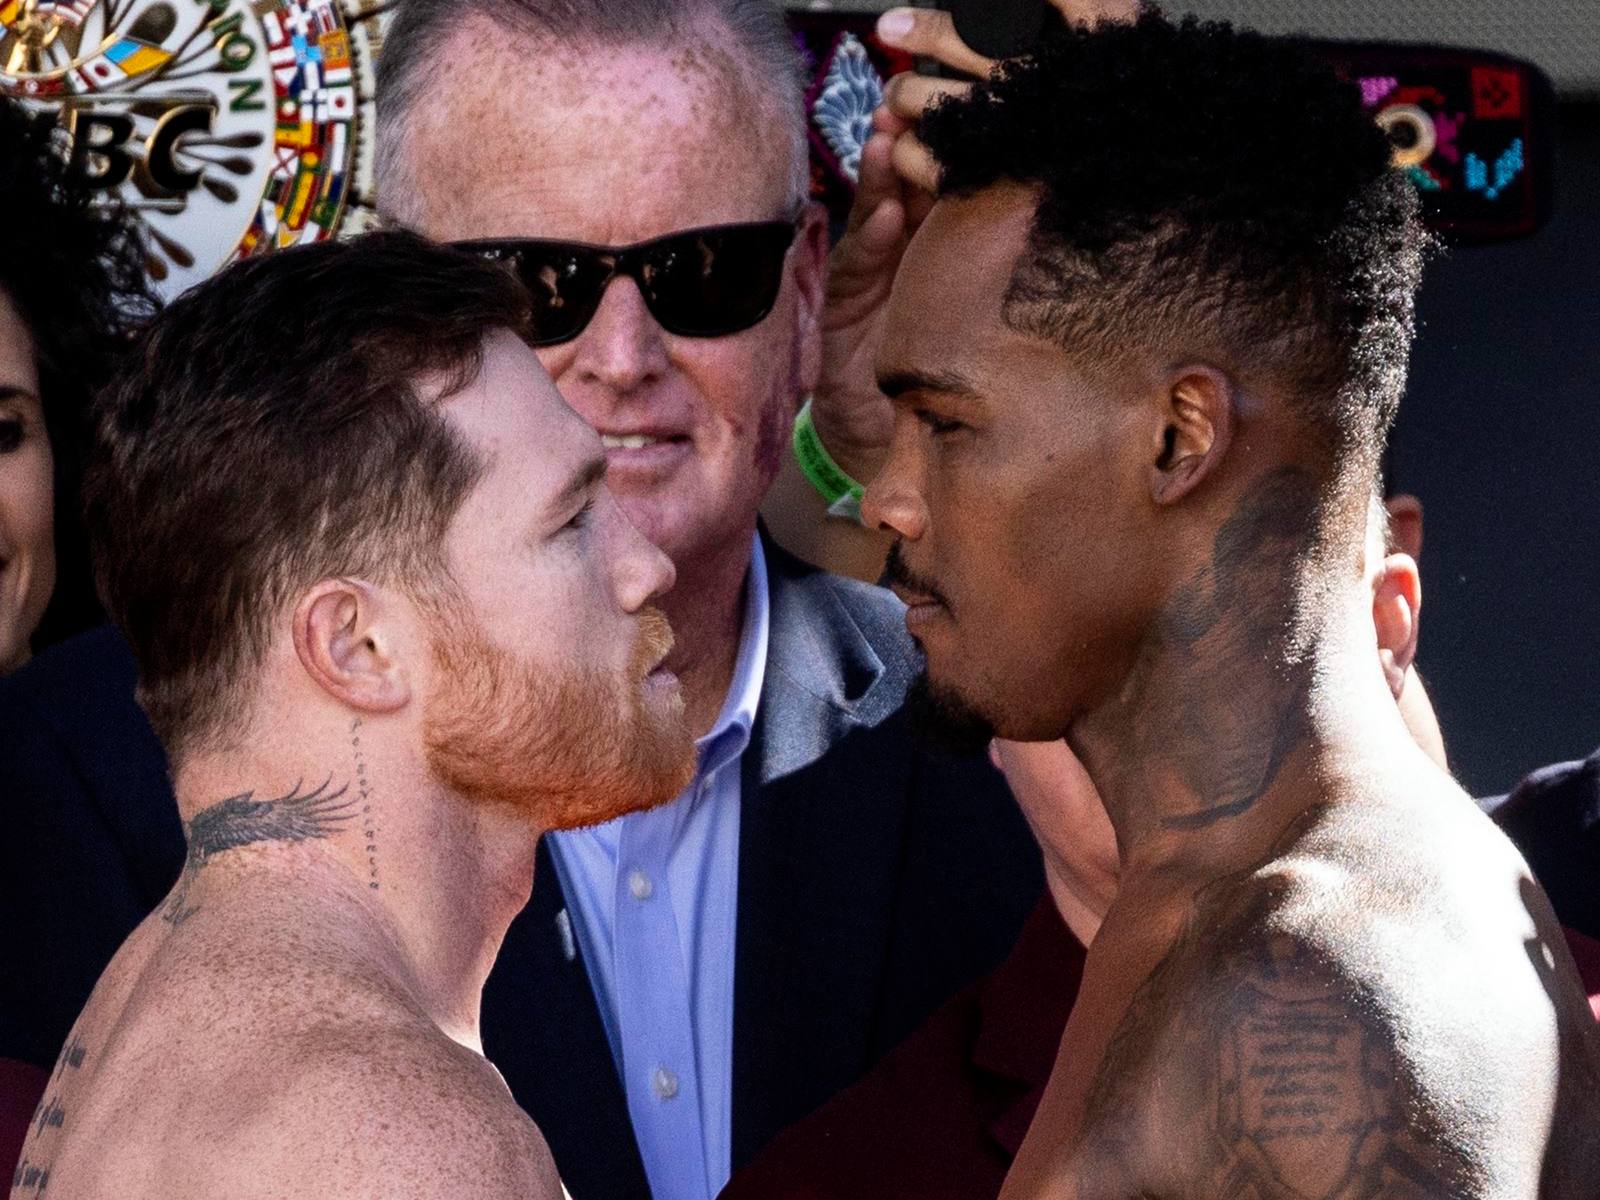 canelo alvarez vs. jermell charlo fight time: What time does the Canelo  Alvarez fight start? ET, PT, and GMT for the main event